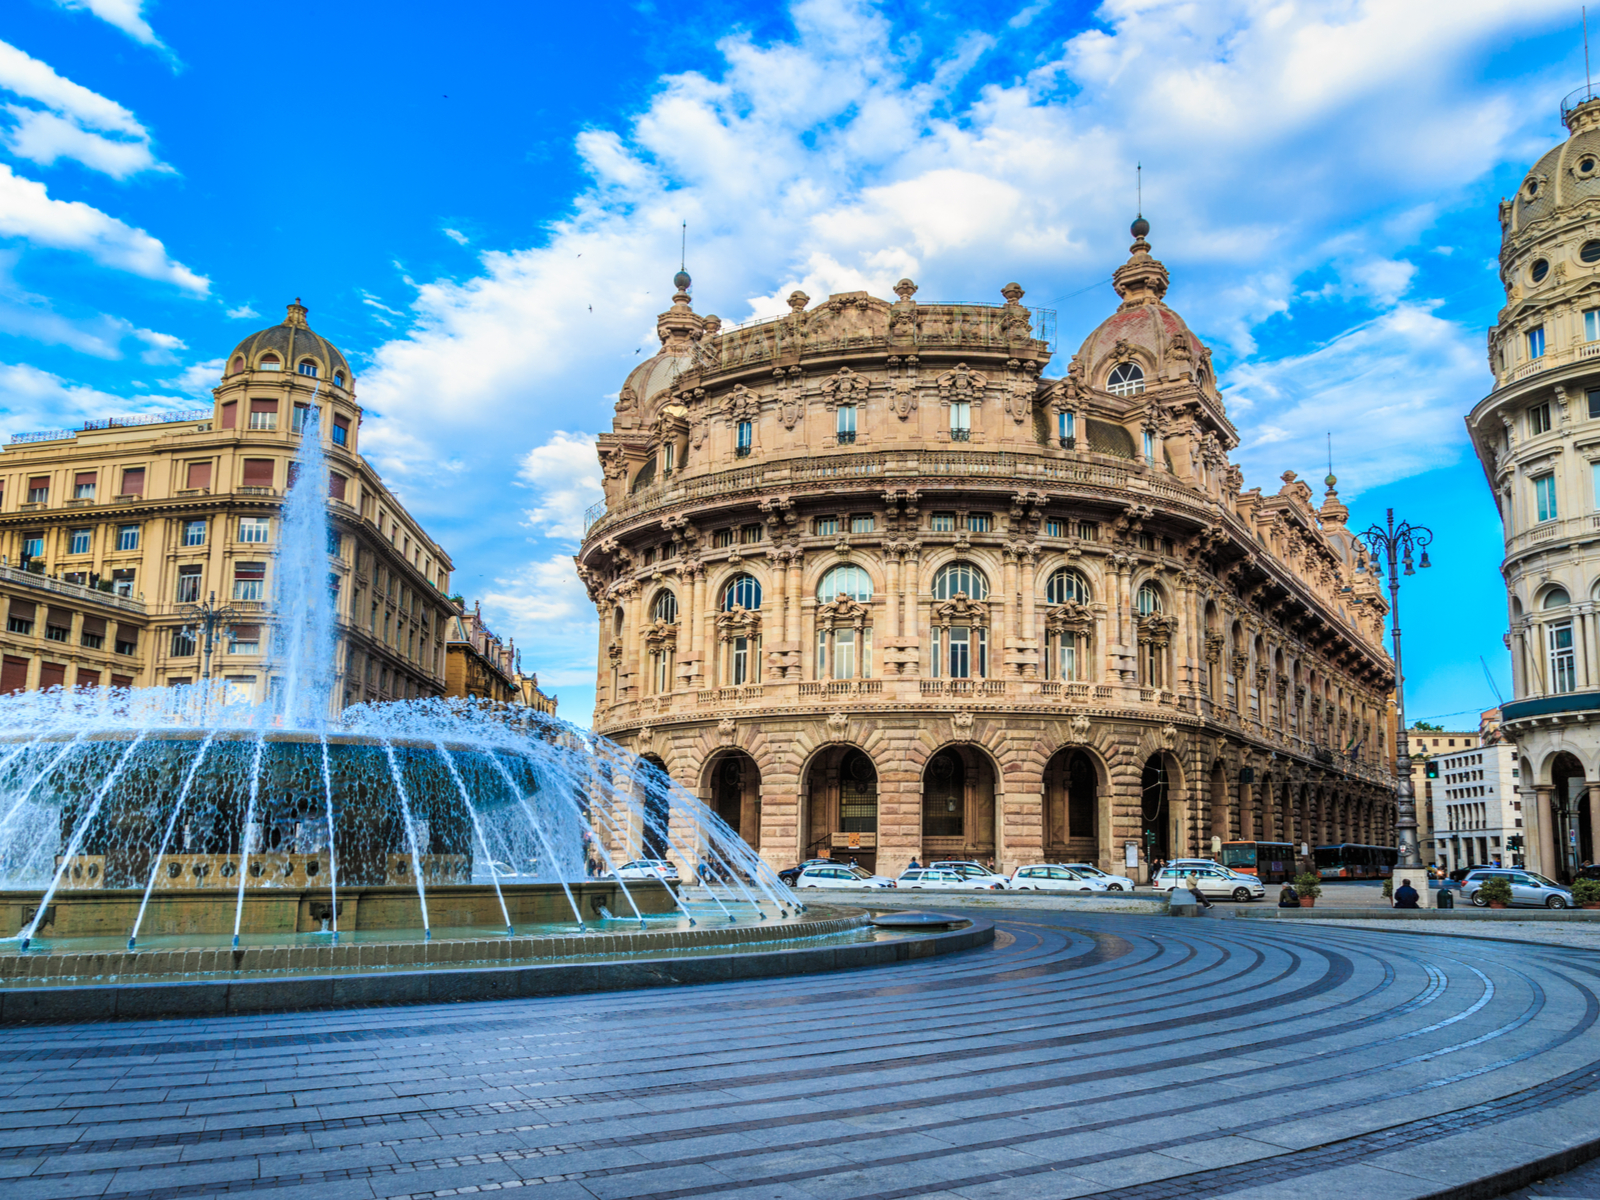 Piazza De Ferrari square in Genoa, one of the best places to visit in Italy